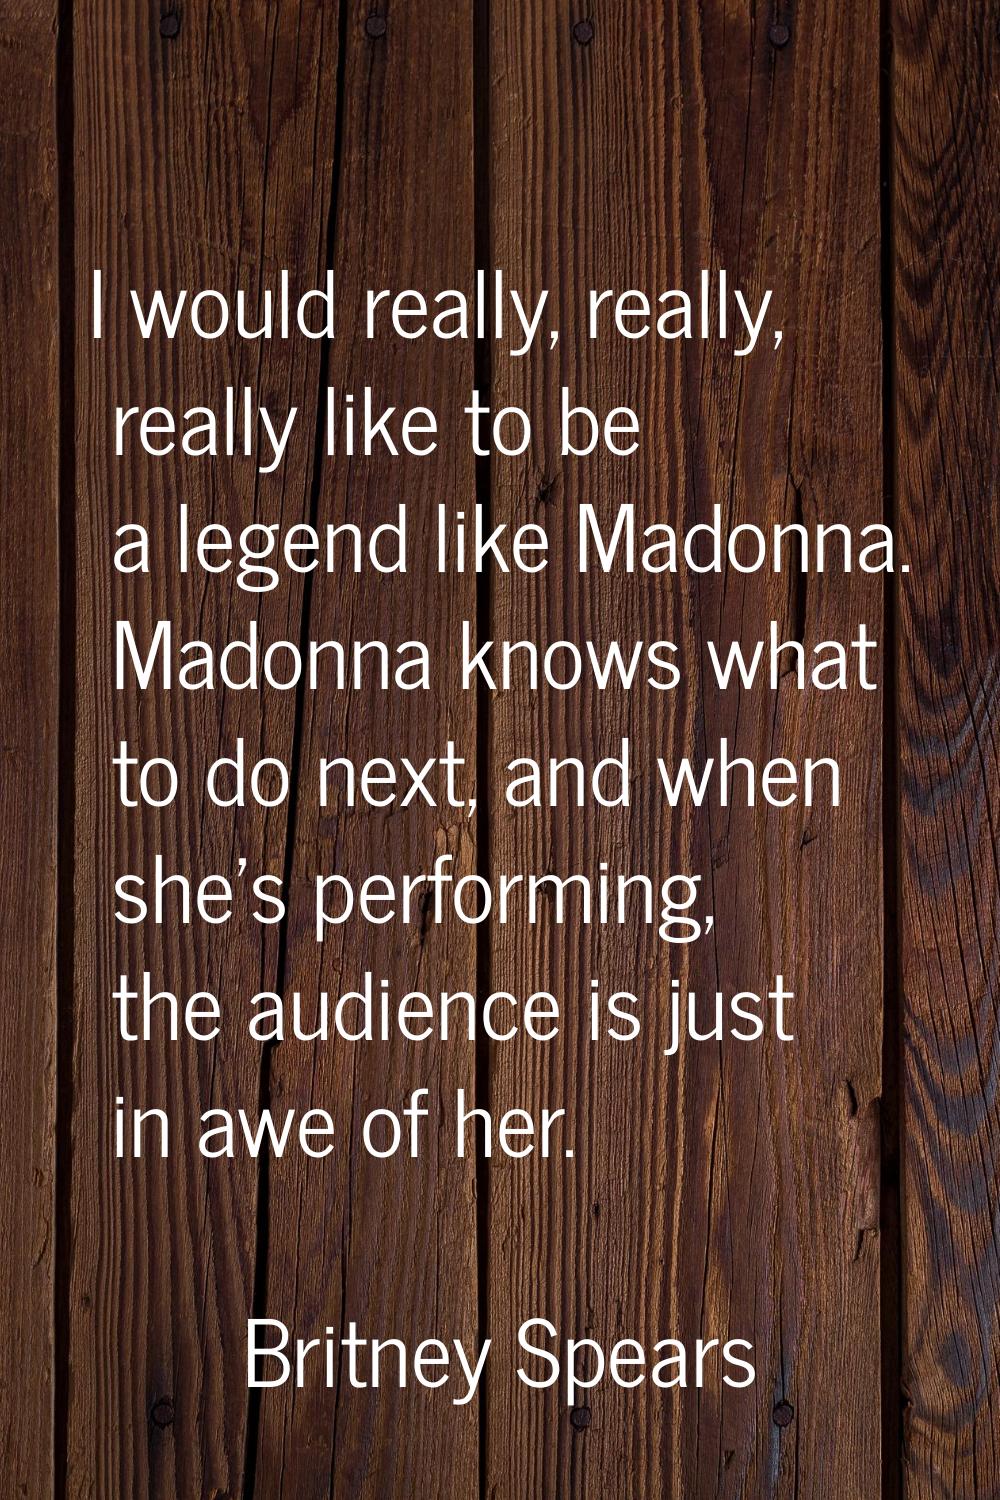 I would really, really, really like to be a legend like Madonna. Madonna knows what to do next, and